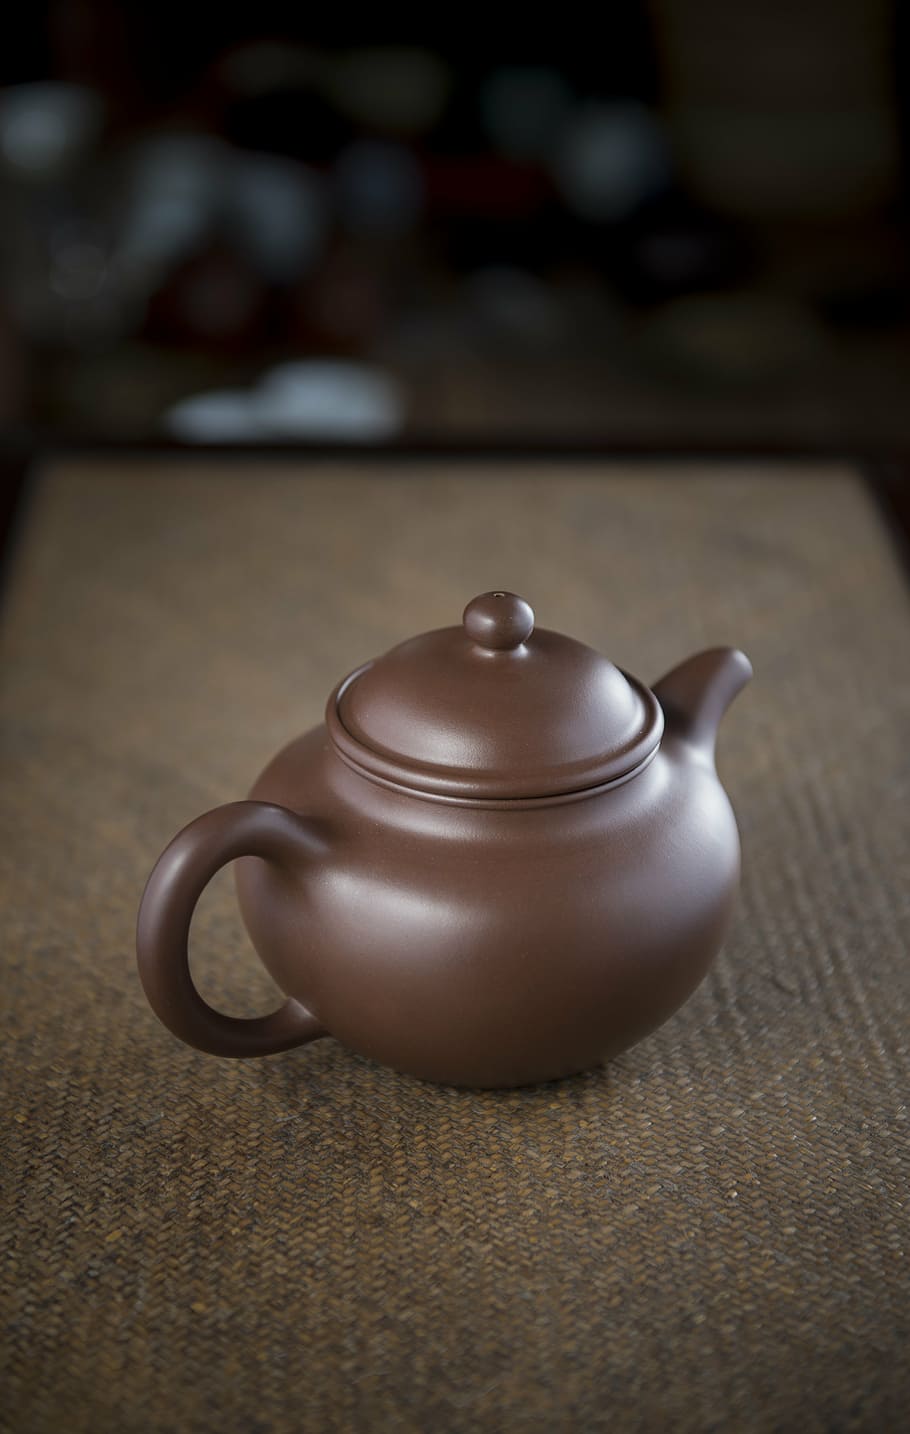 tea, antique, purple, teapot, tea - Hot Drink, cultures, table, indoors, focus on foreground, close-up